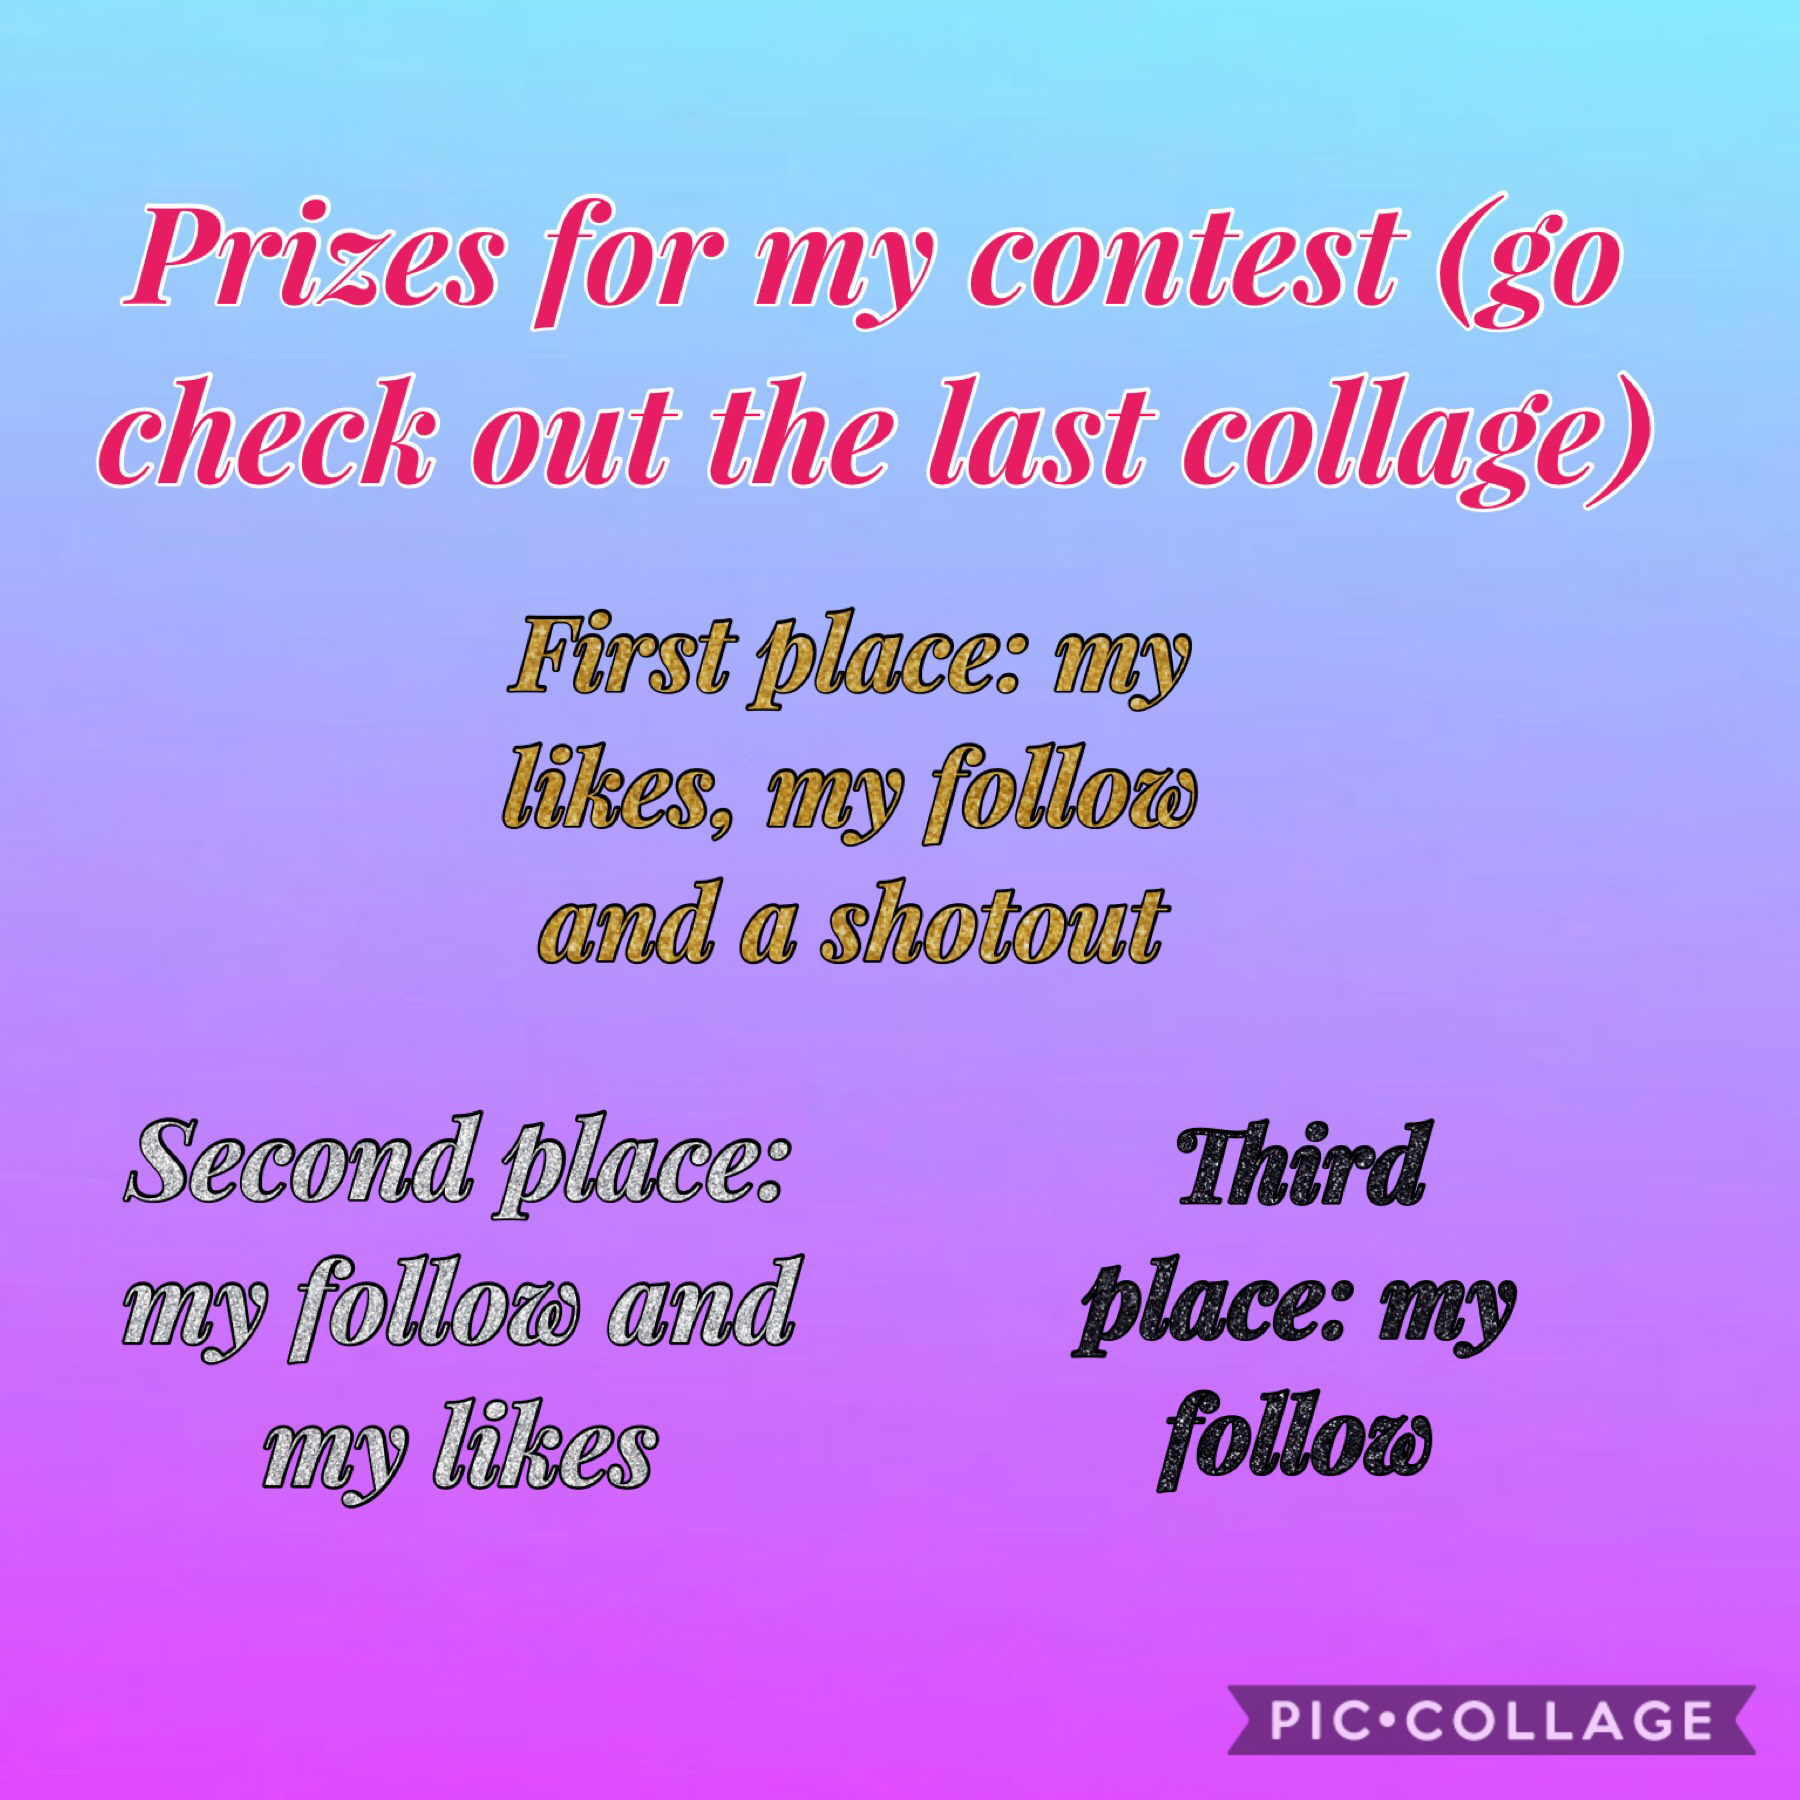 GO JOIN MY CONTEST!!!!!